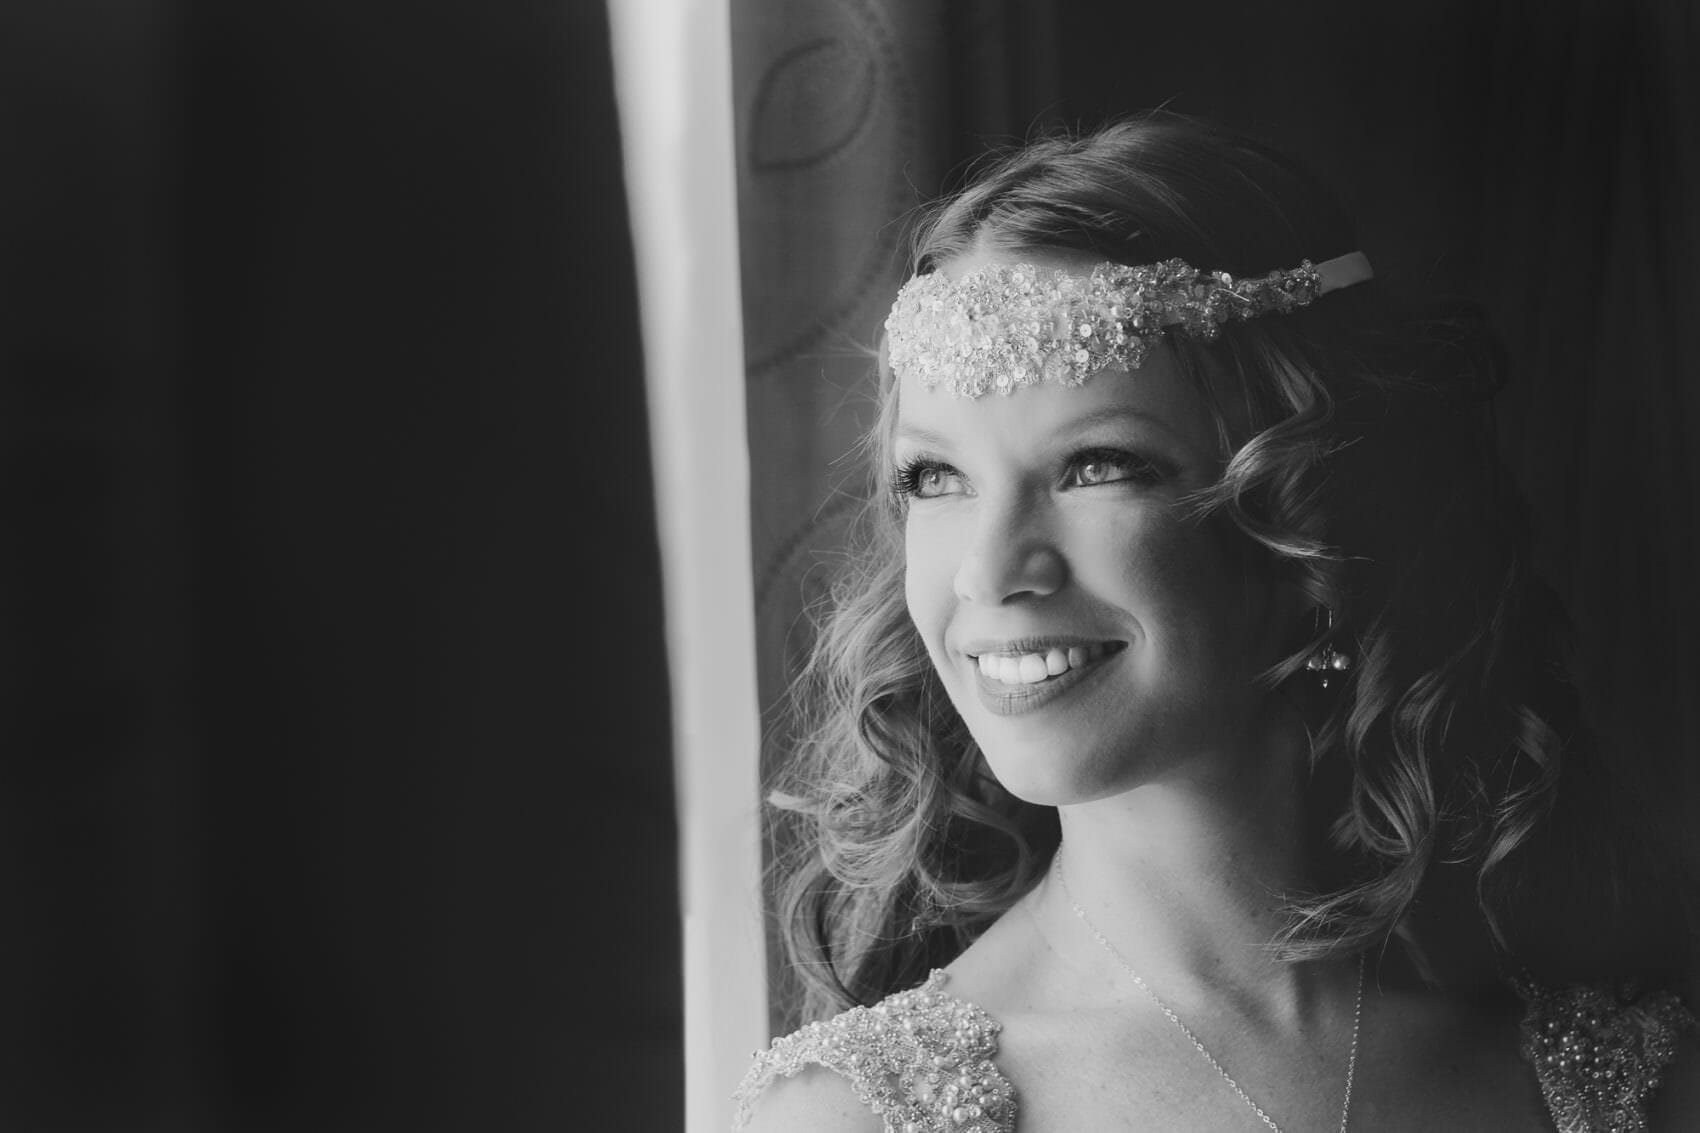 Bride looks out of a window in black & White